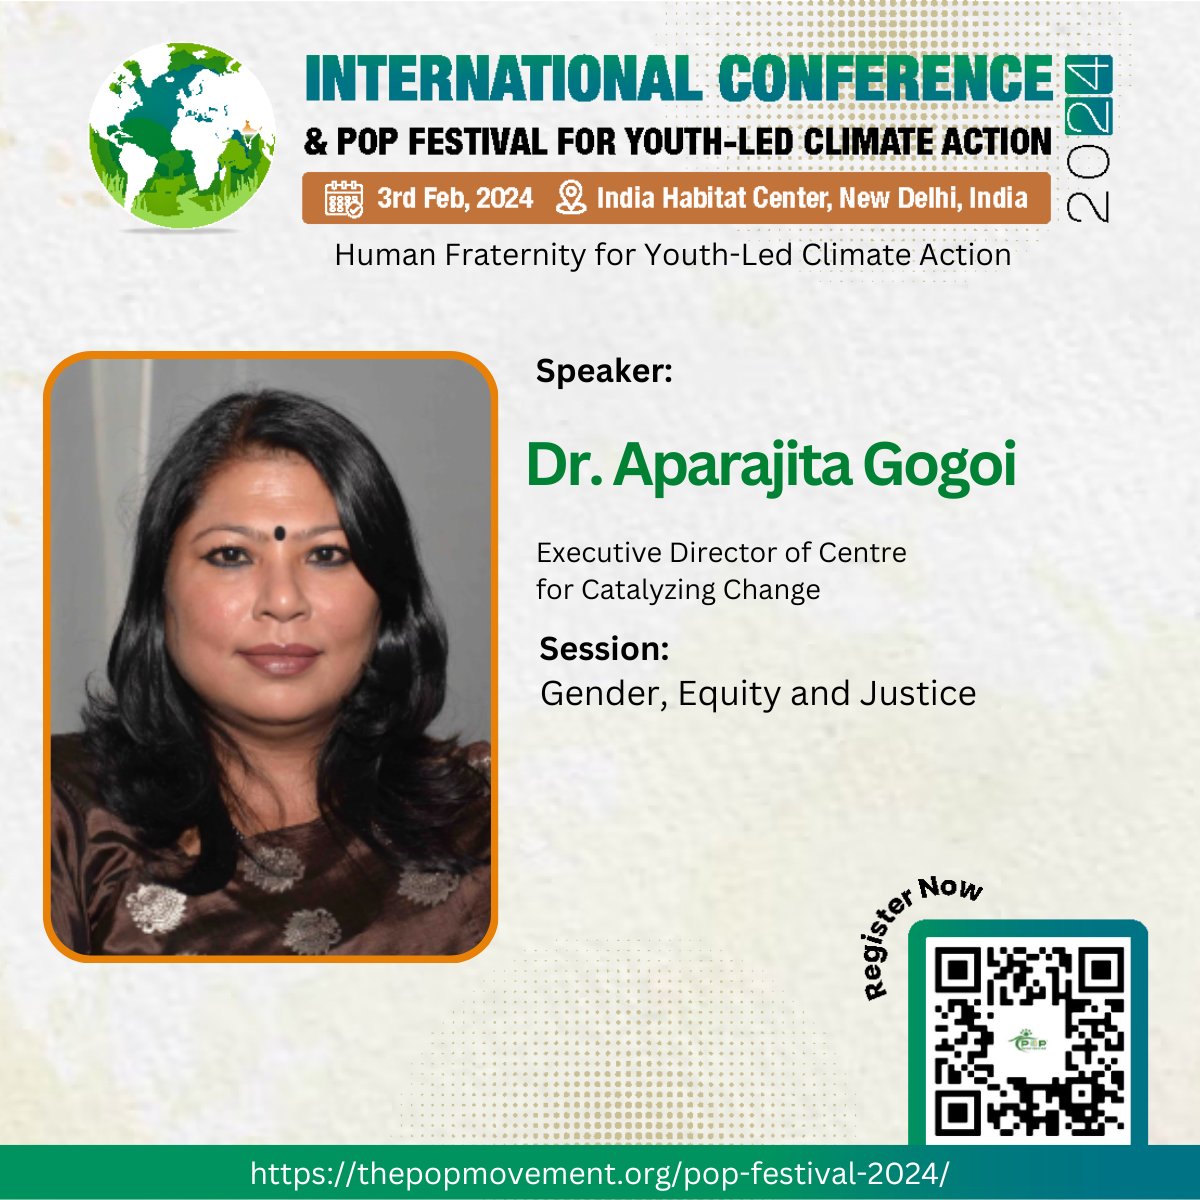 Exciting news! Dr. Aparajita Gogoi, Executive Director at C3, is set to speak at the International Conference and POP Festival for Youth-Led Climate Action 2024, exploring the intersections between #climatechange, #gender, #justice, and #equity. This ground-breaking event will